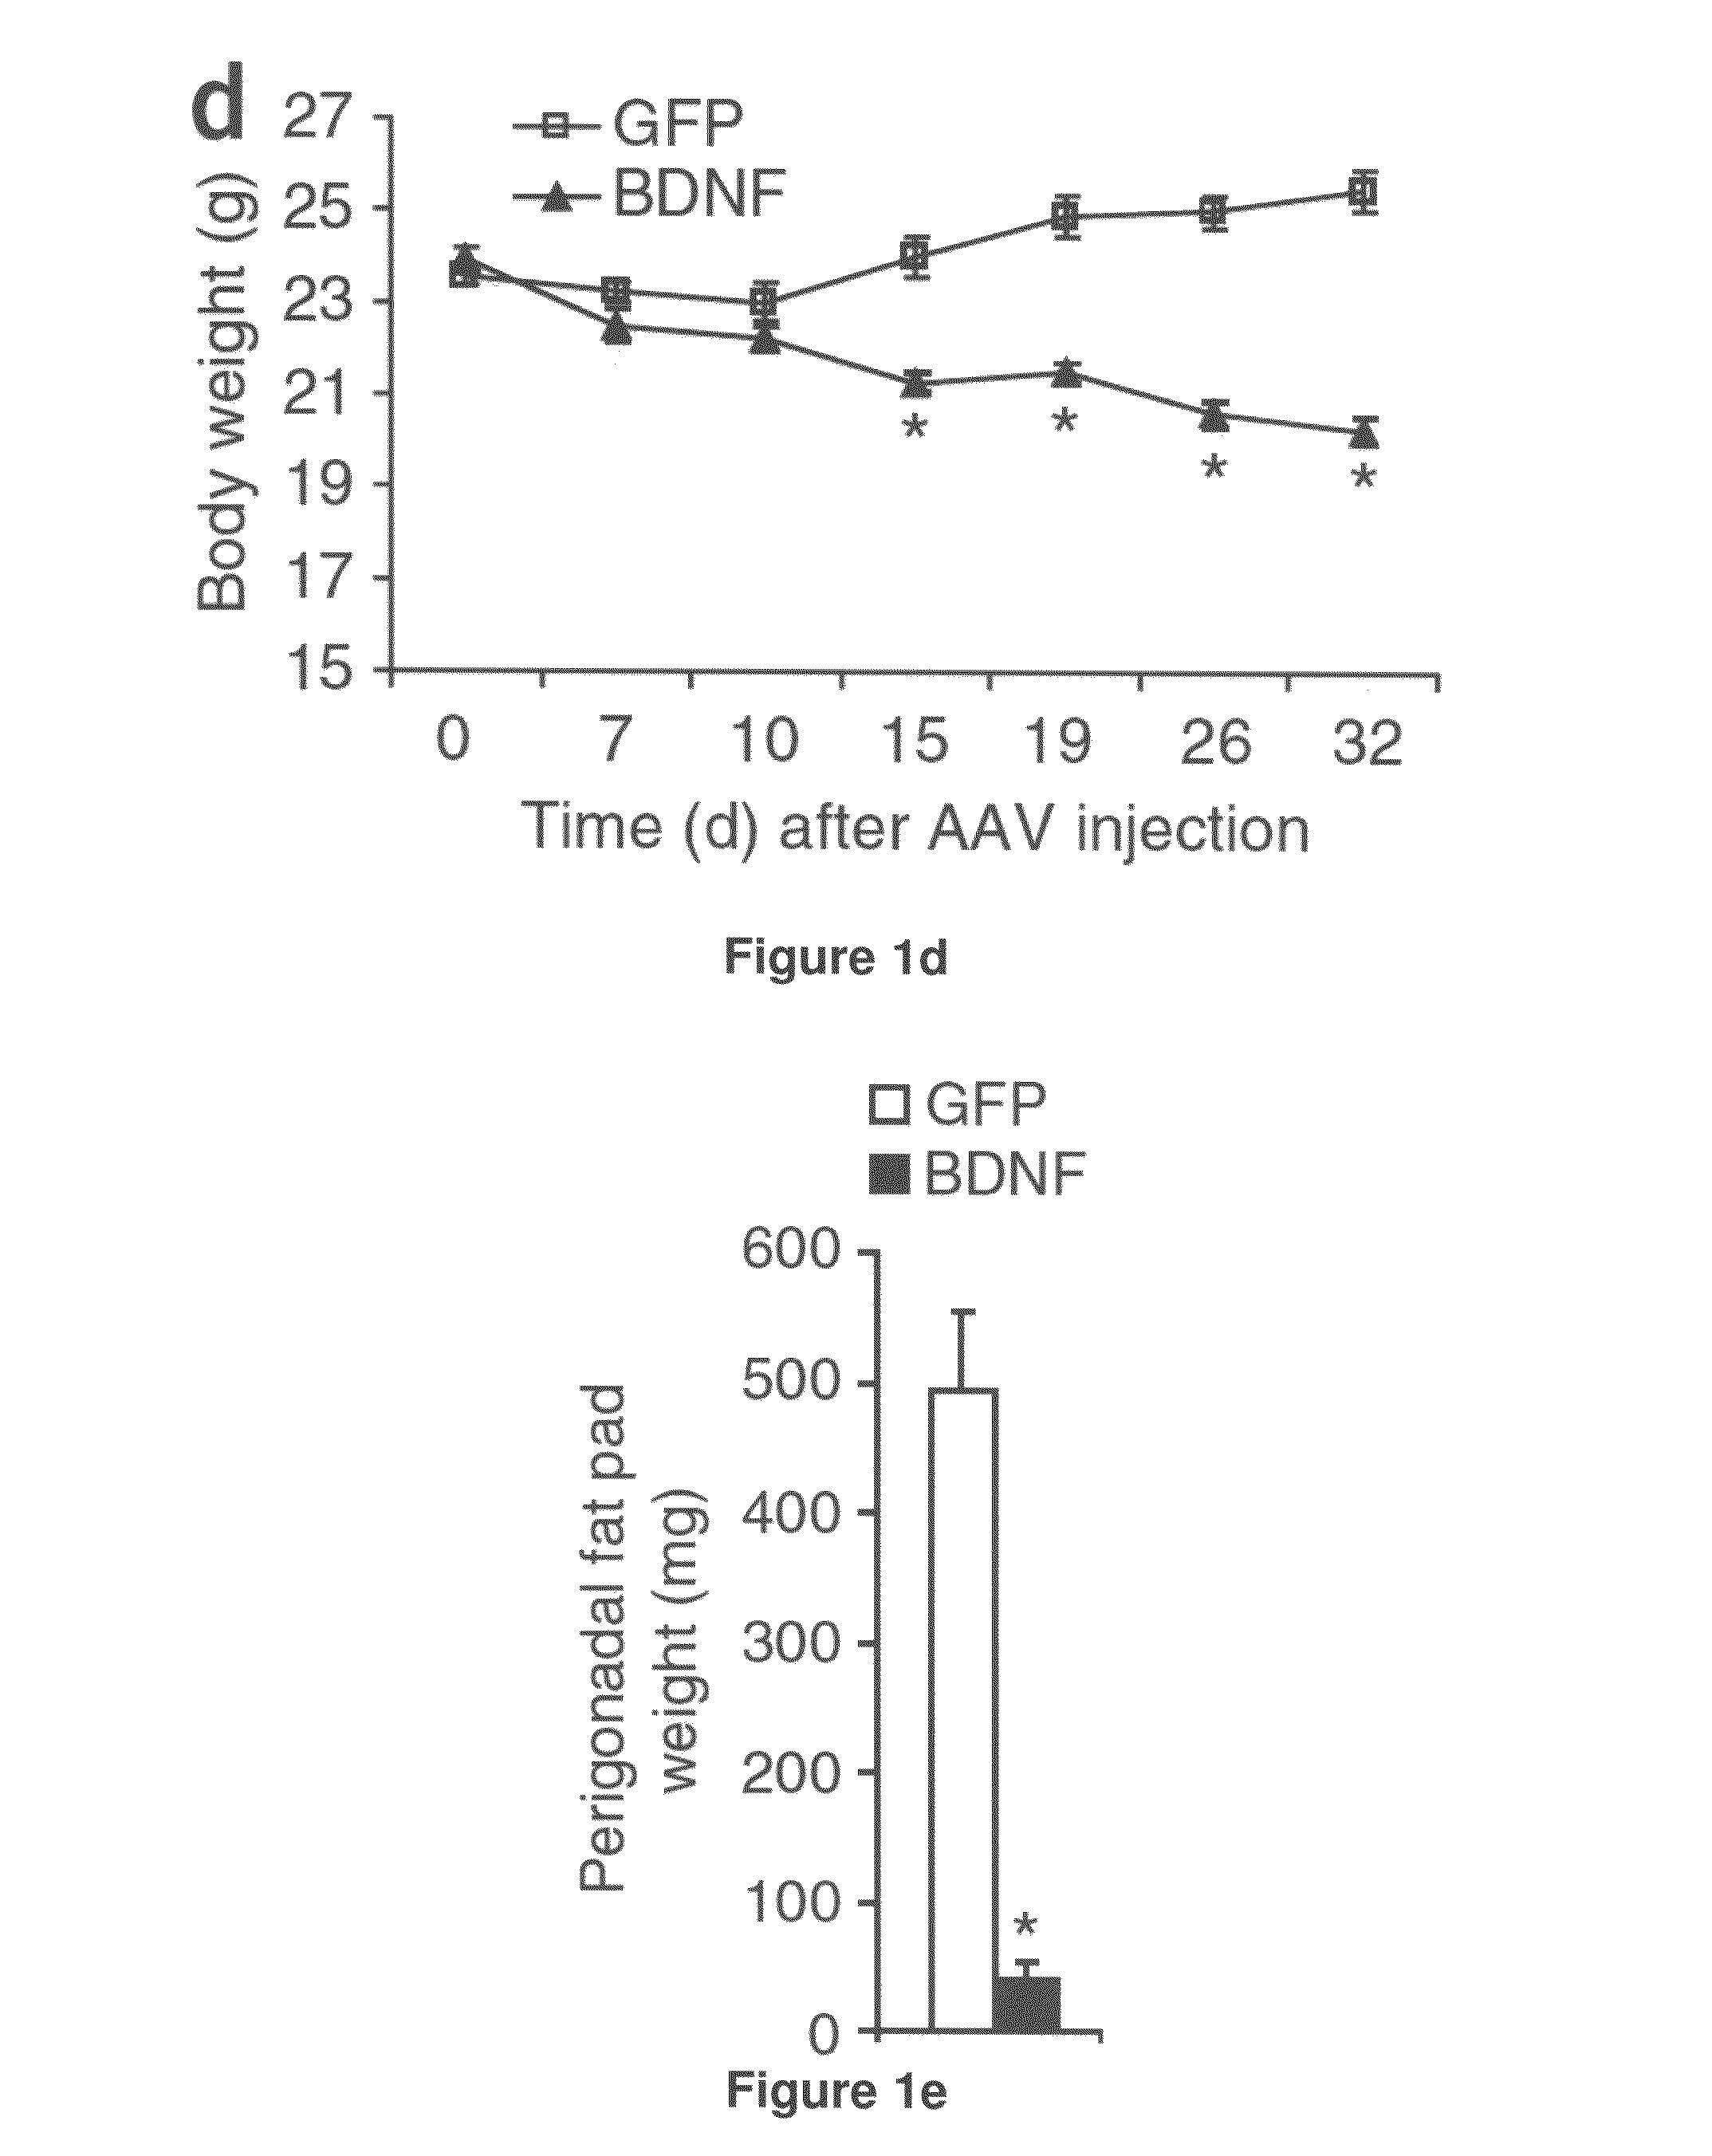 Treatment of metabolic-related disorders using hypothalamic gene transfer of BDNF and compositions therefor